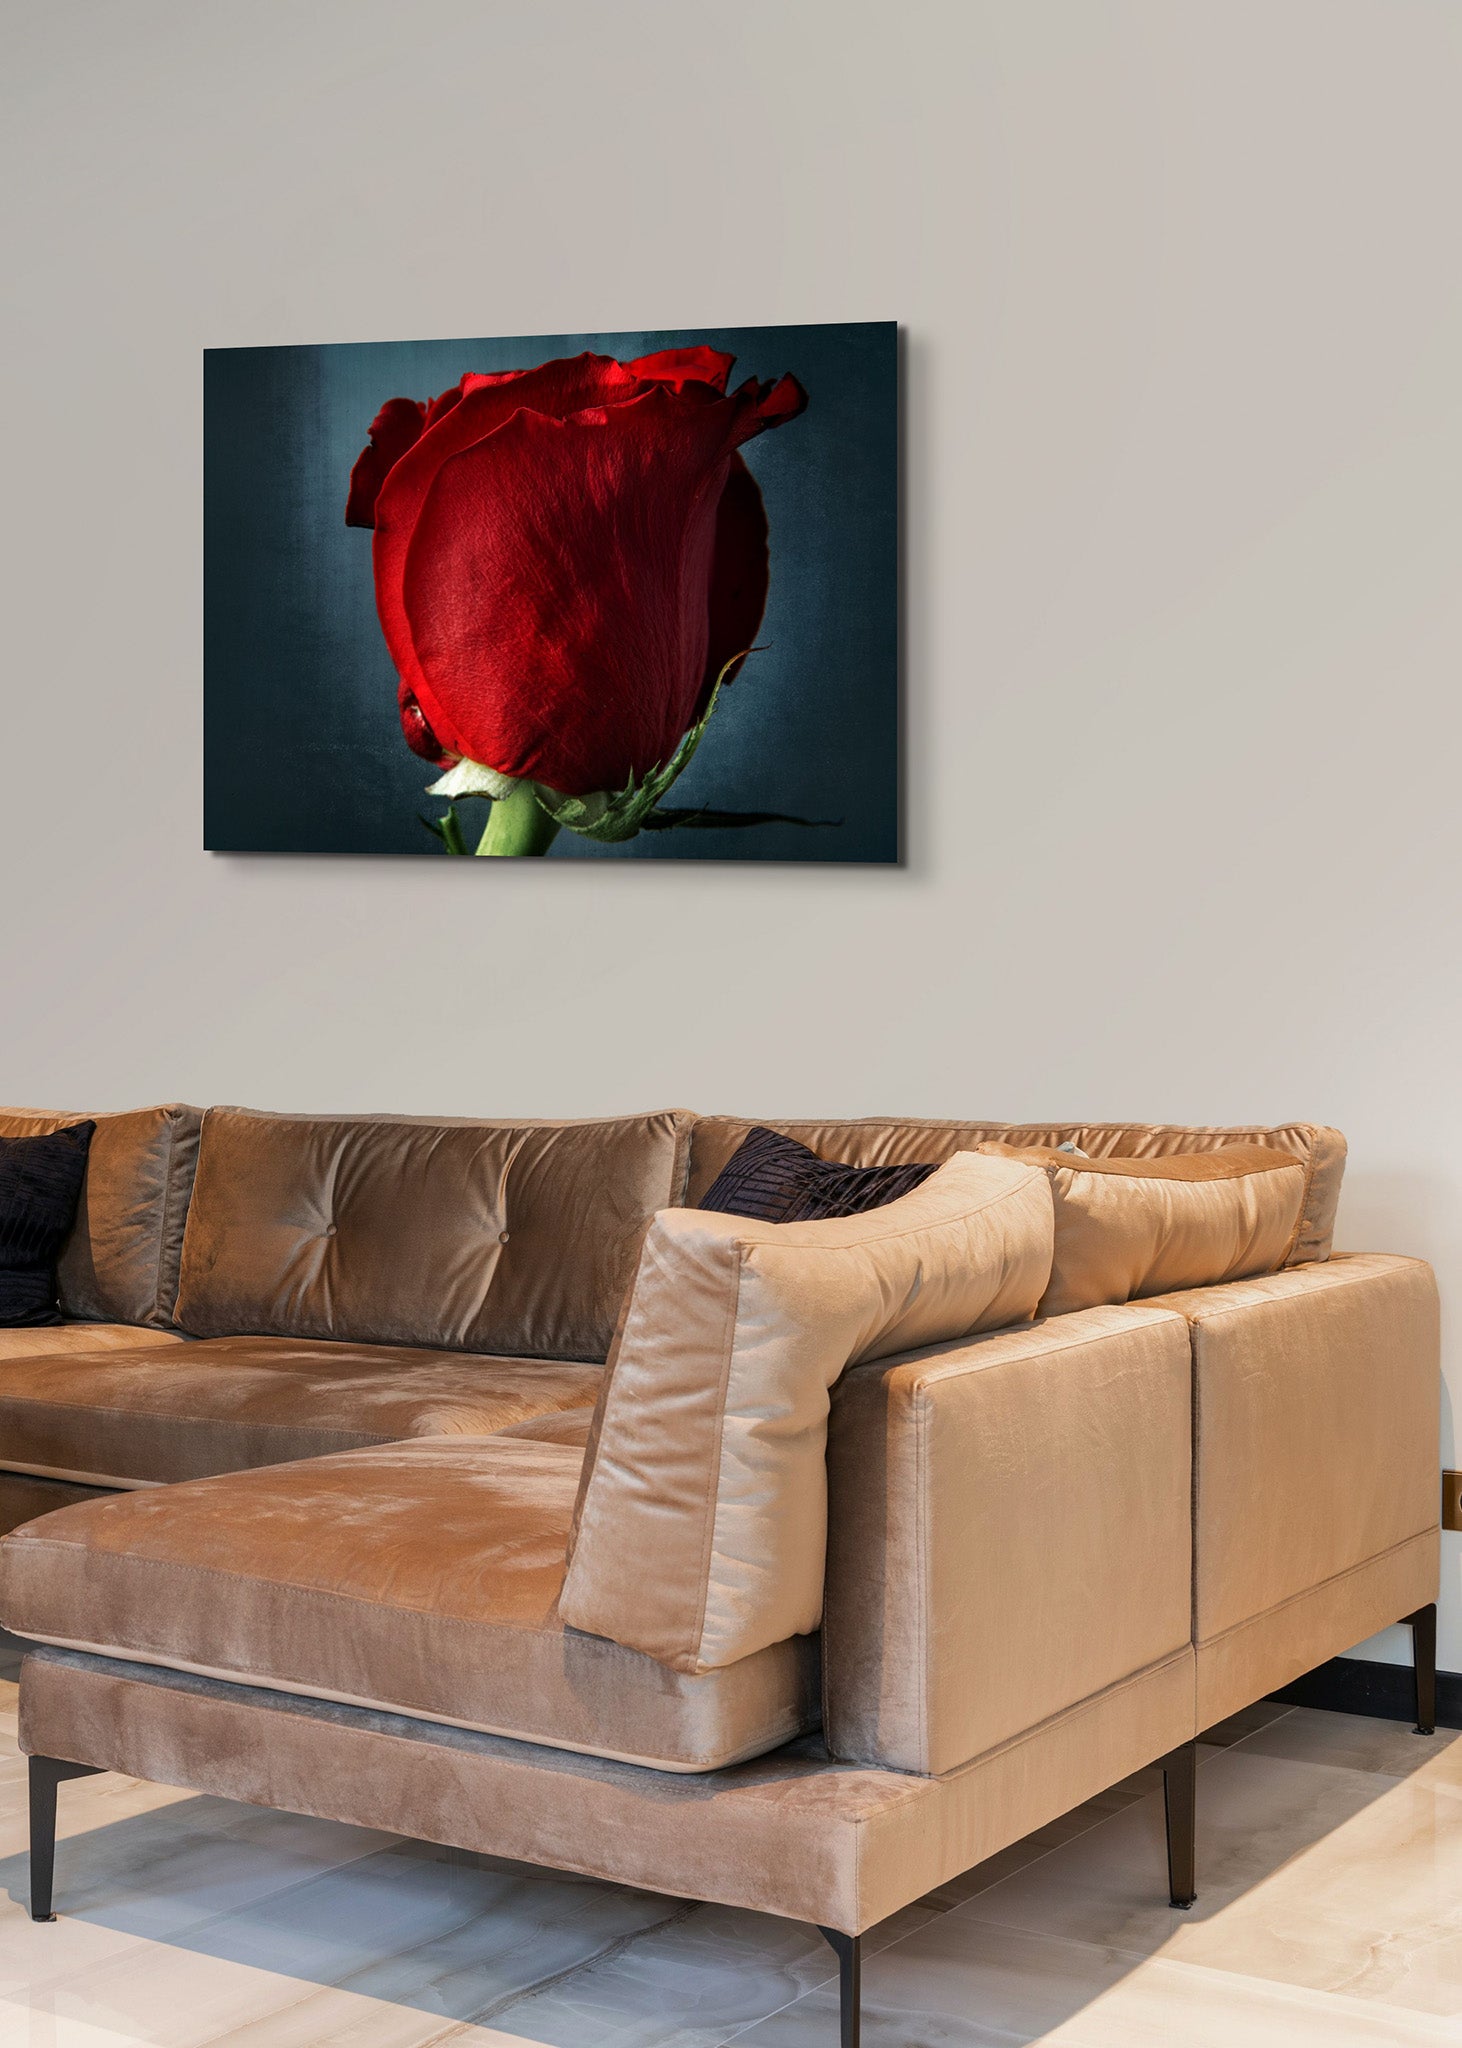 Large picture hanging on the wall of a room. There is also a tan sofa in the room. The picture is a fine art flower photograph of a red rose tilted "Dangerous" by Cameron Dreaux of Dreaux Fine Art.